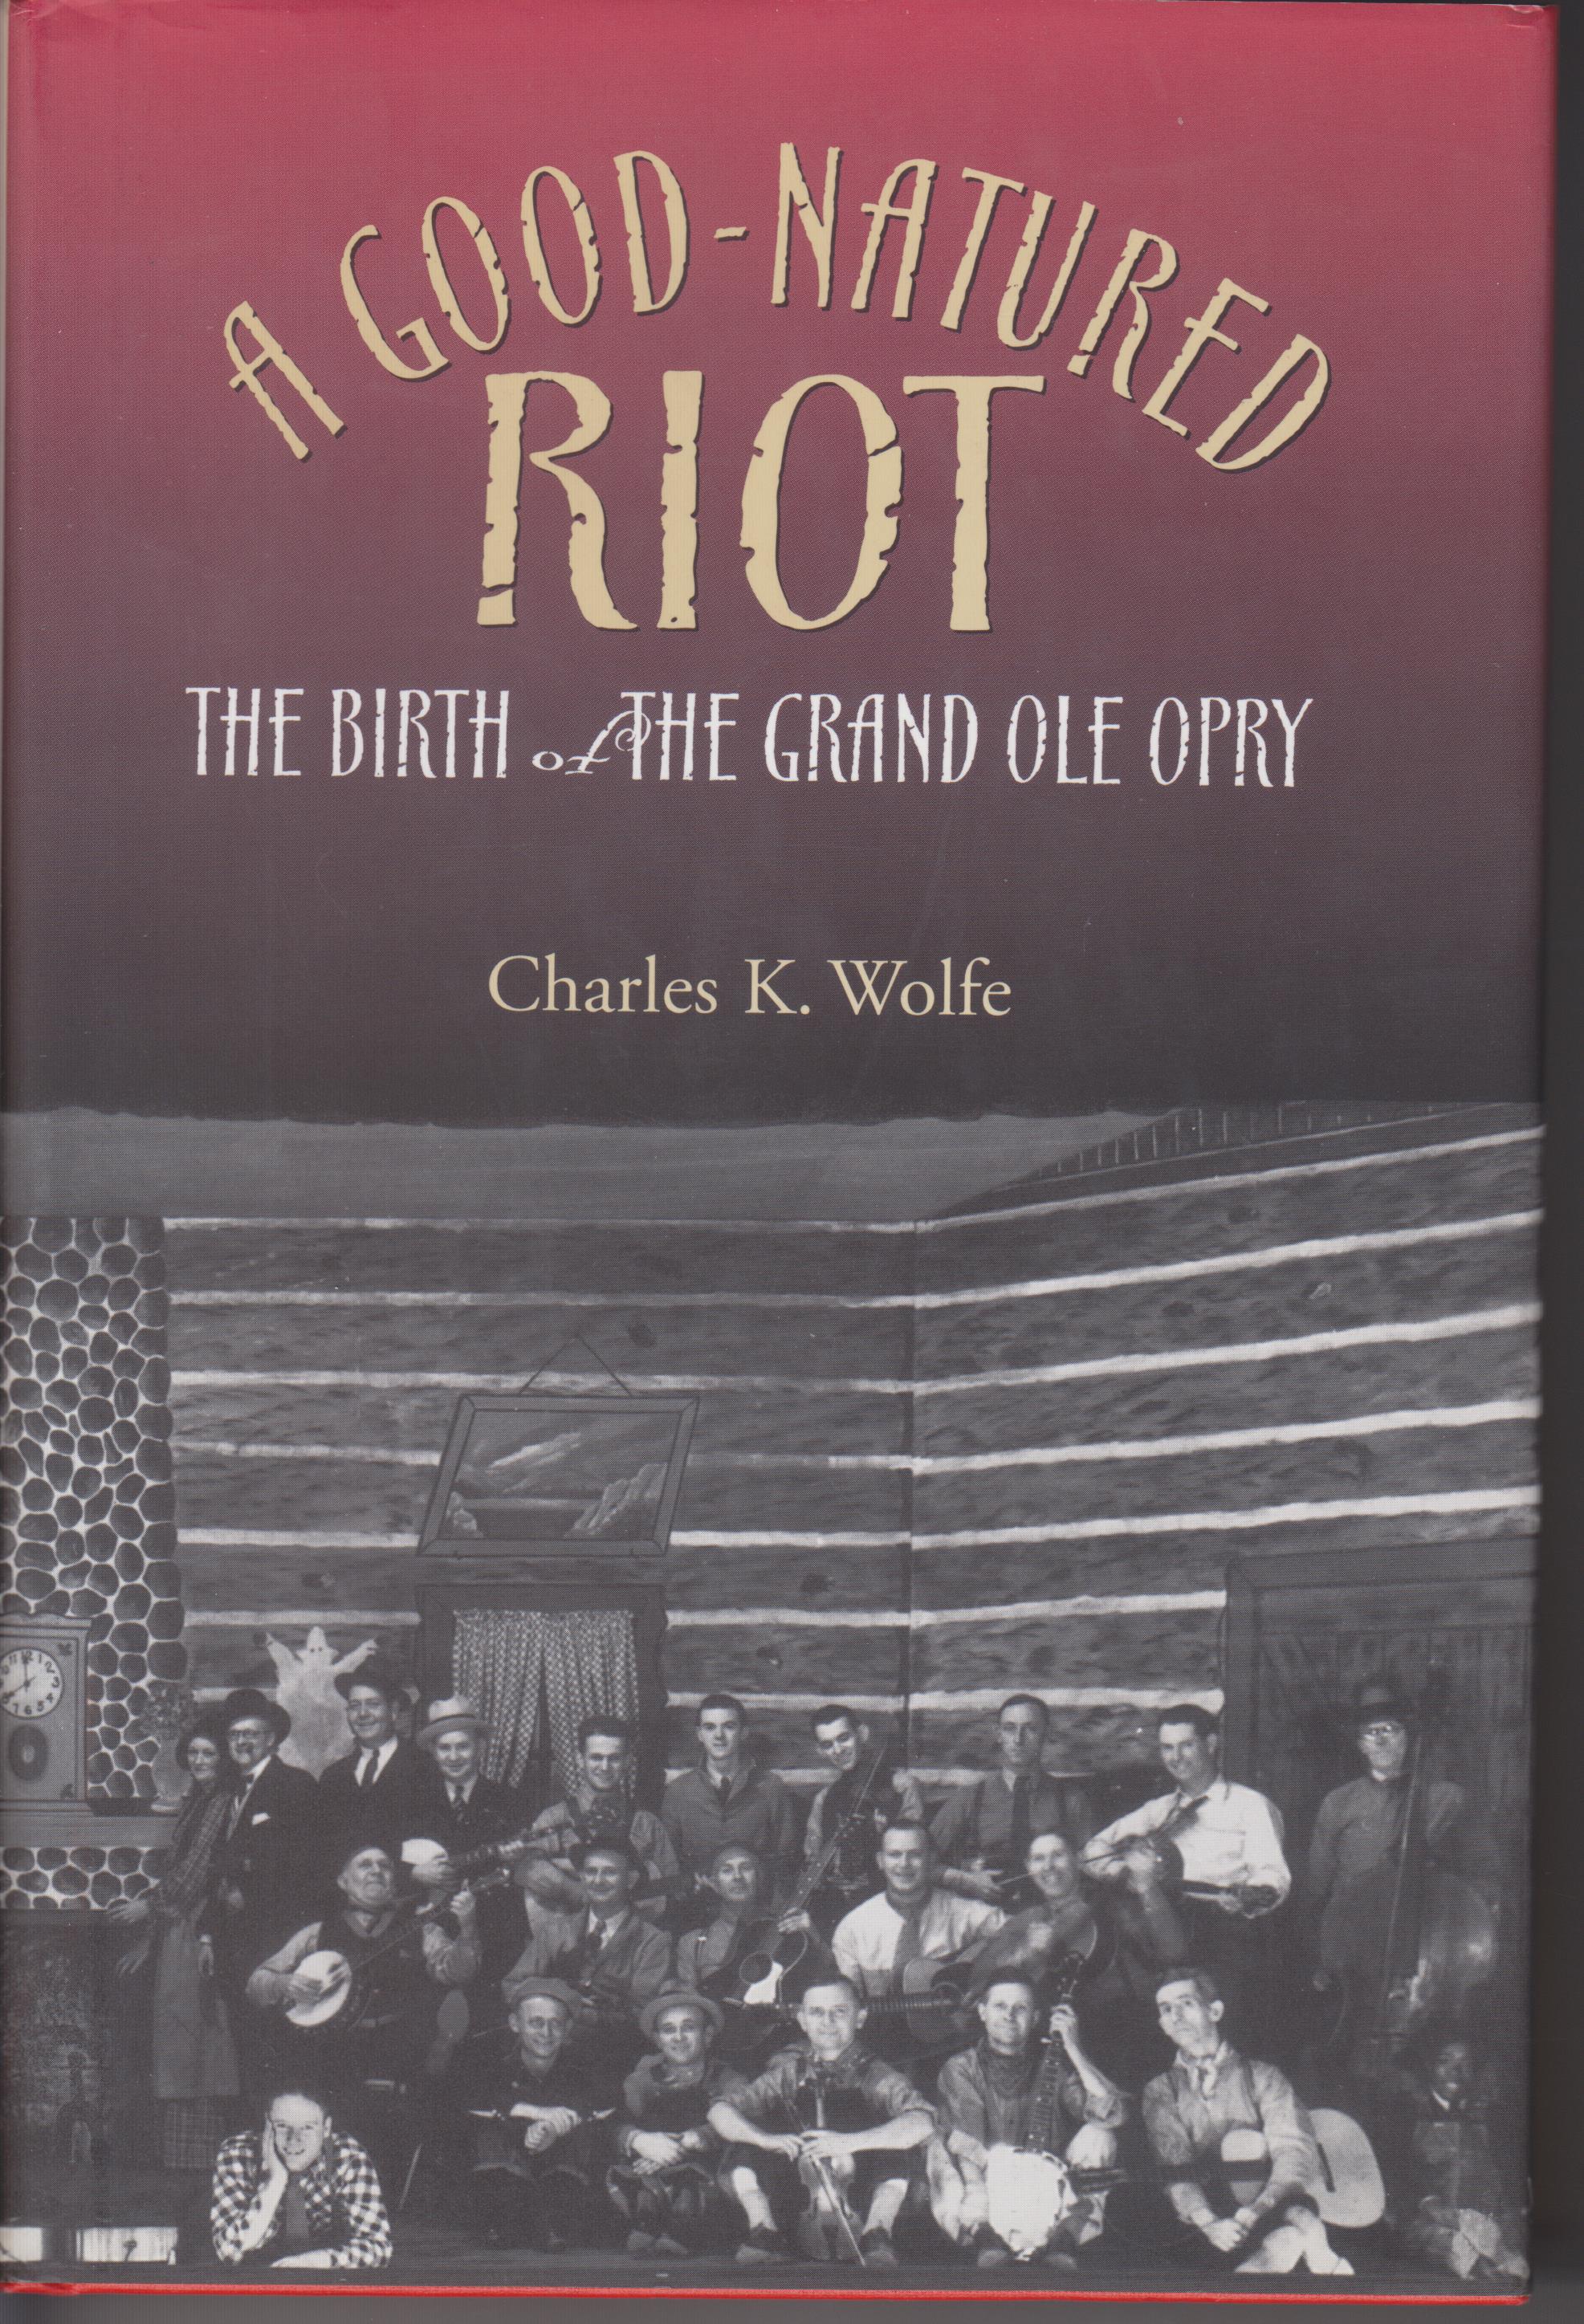 A Good-Natured Riot. The Birth of the Grand Ole Opry - Wolfe, Charles K.